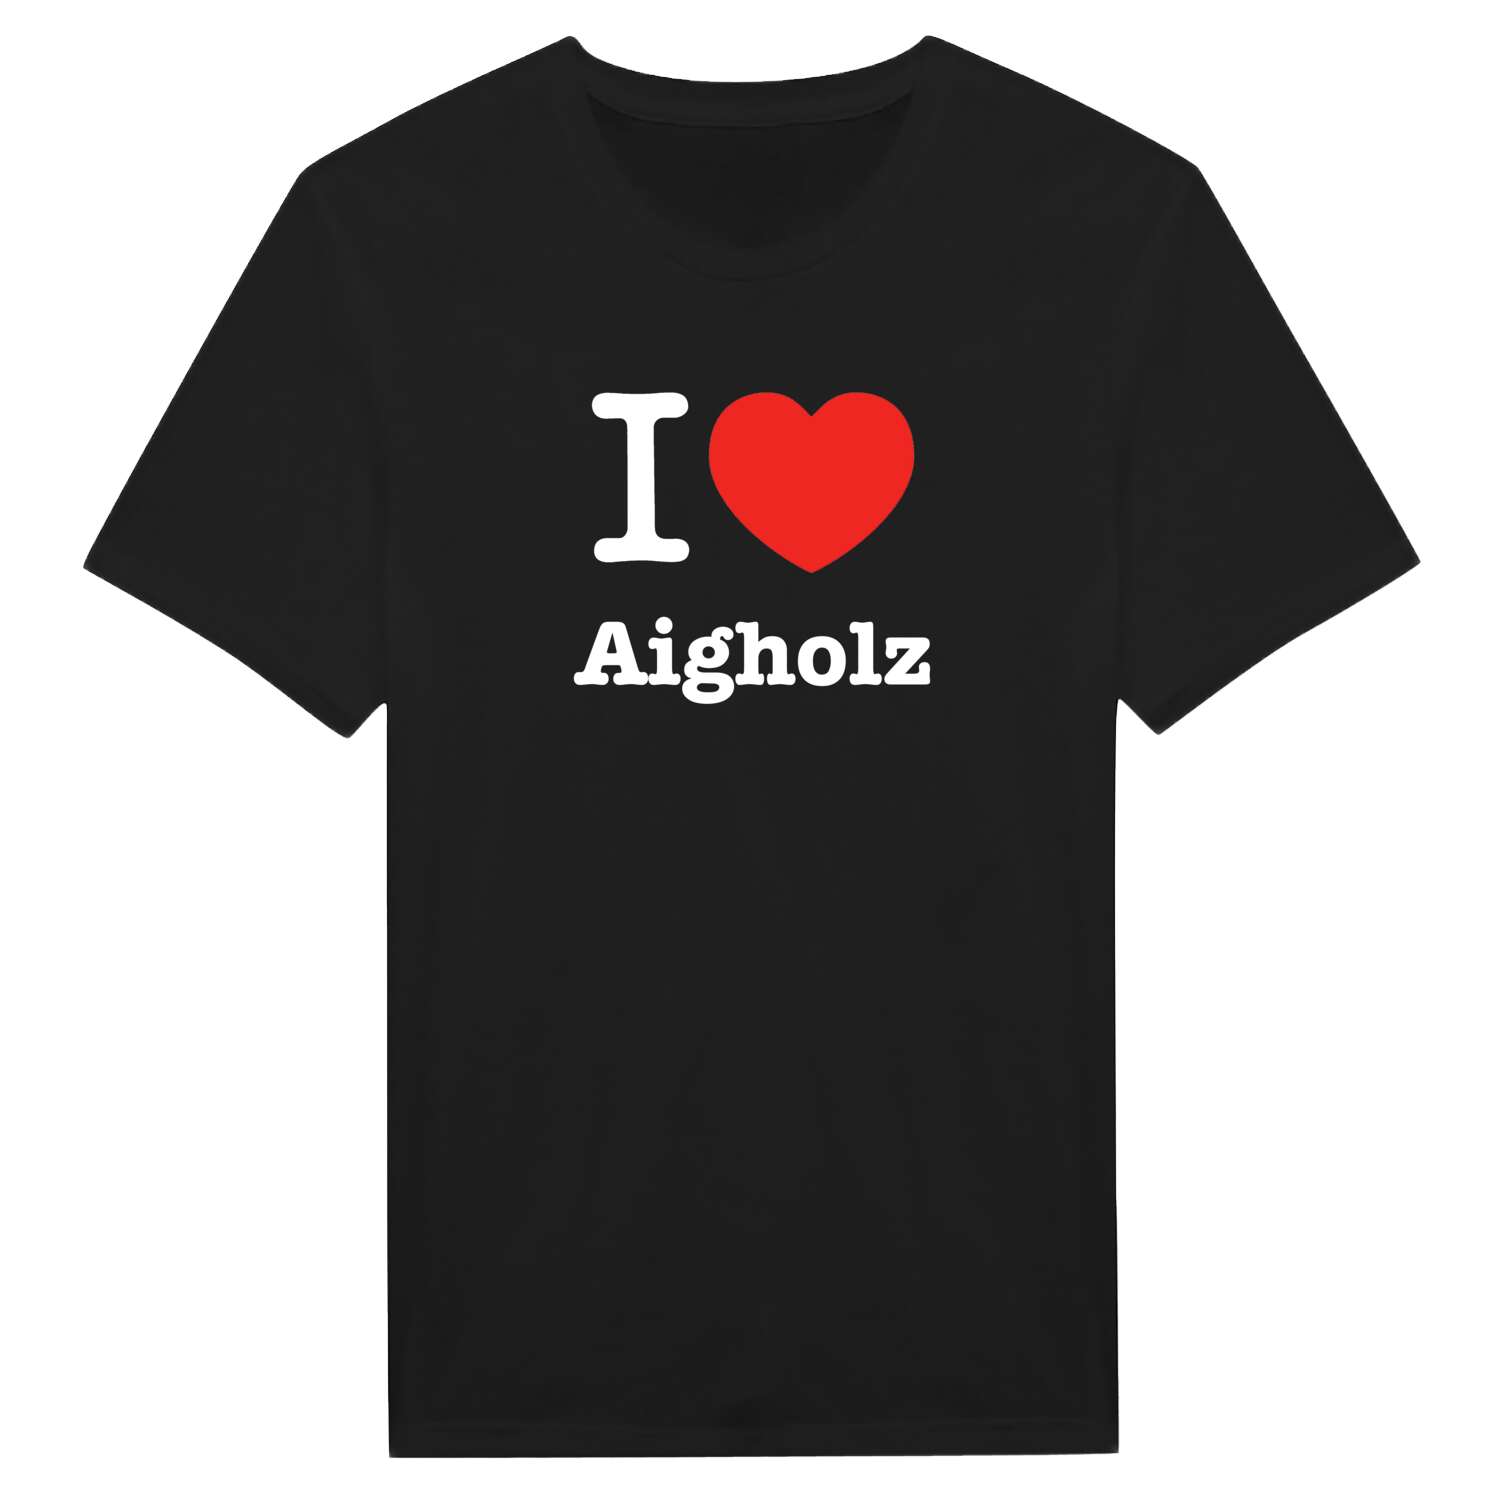 Aigholz T-Shirt »I love«